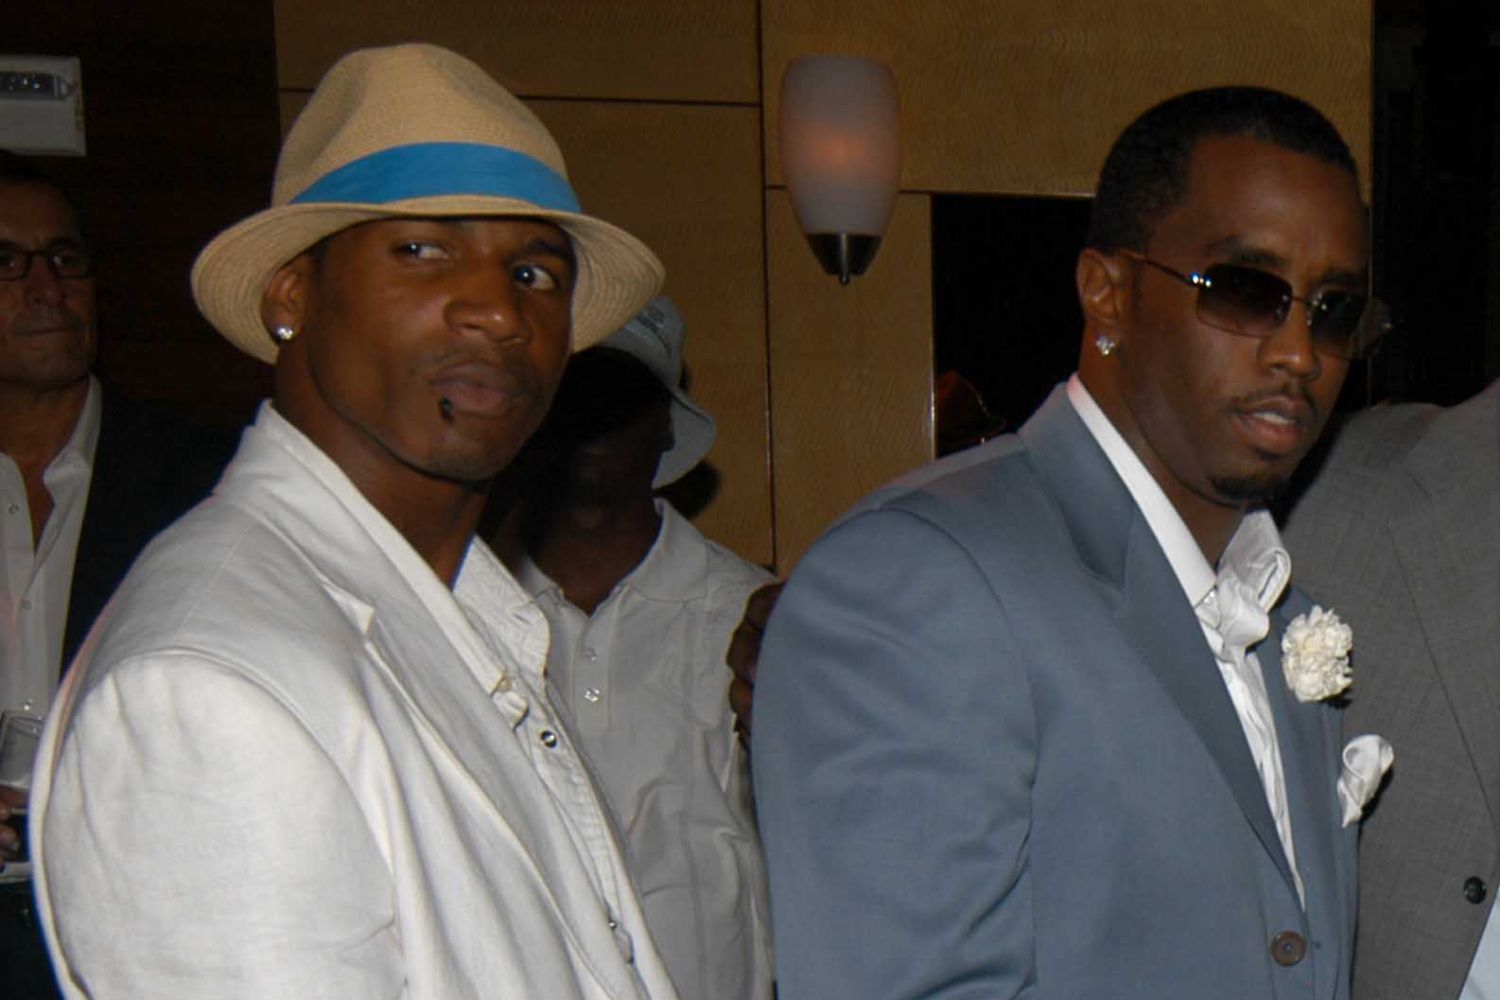 Stevie J Says He Was Present When Federal Agents Busted Into Diddy’s Miami Home With “Excessive Force” thumbnail